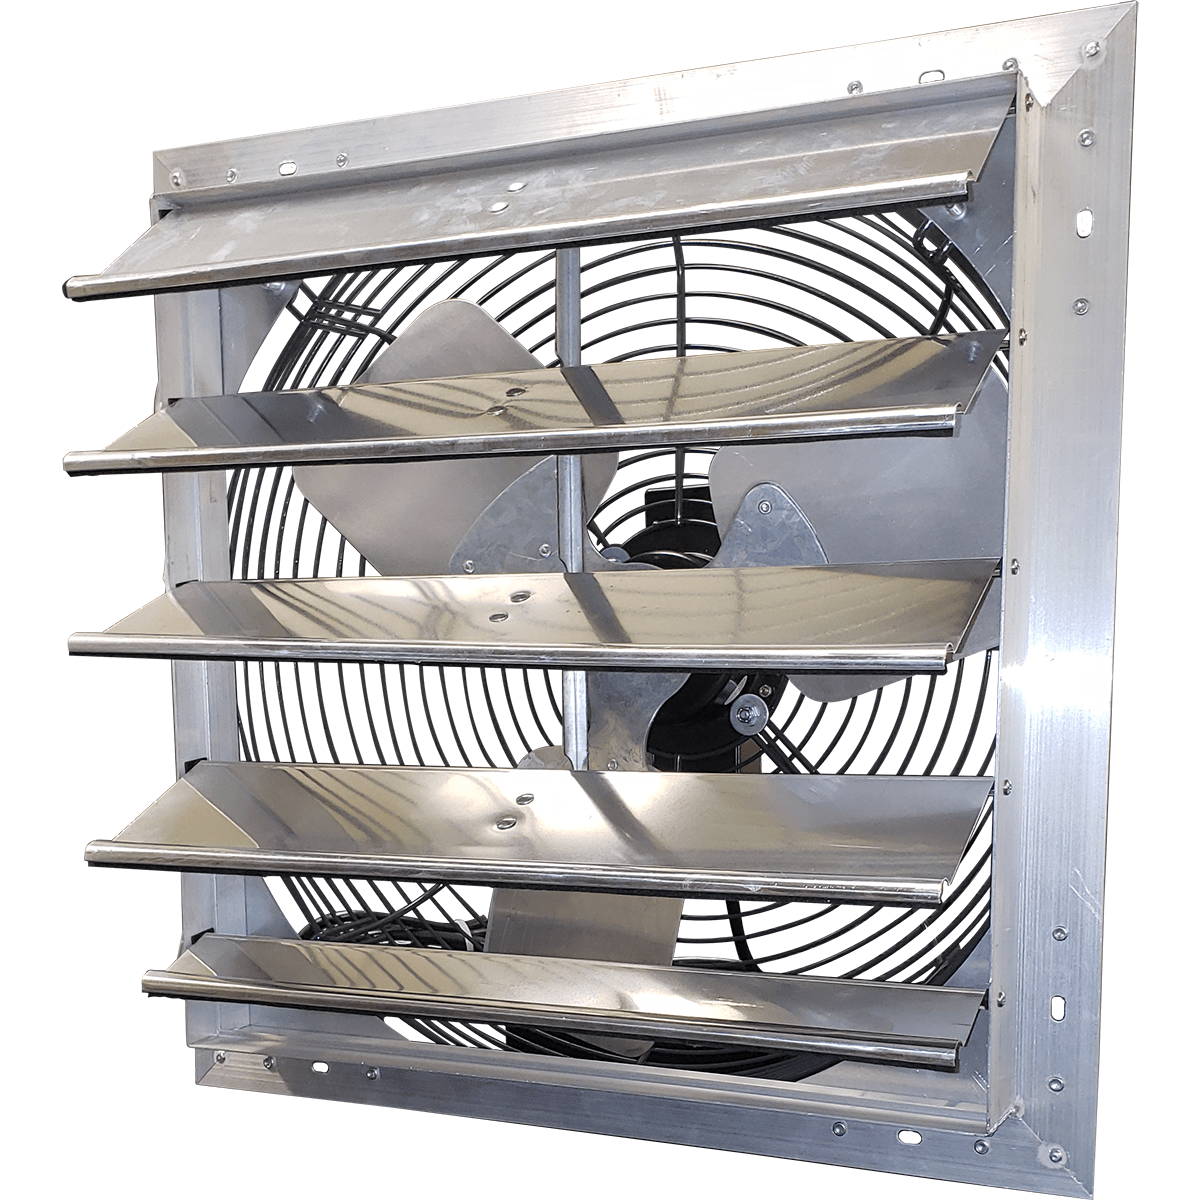 Hessaire 24 Inch Shutter Mounted Exhaust Fan - Variable Speed